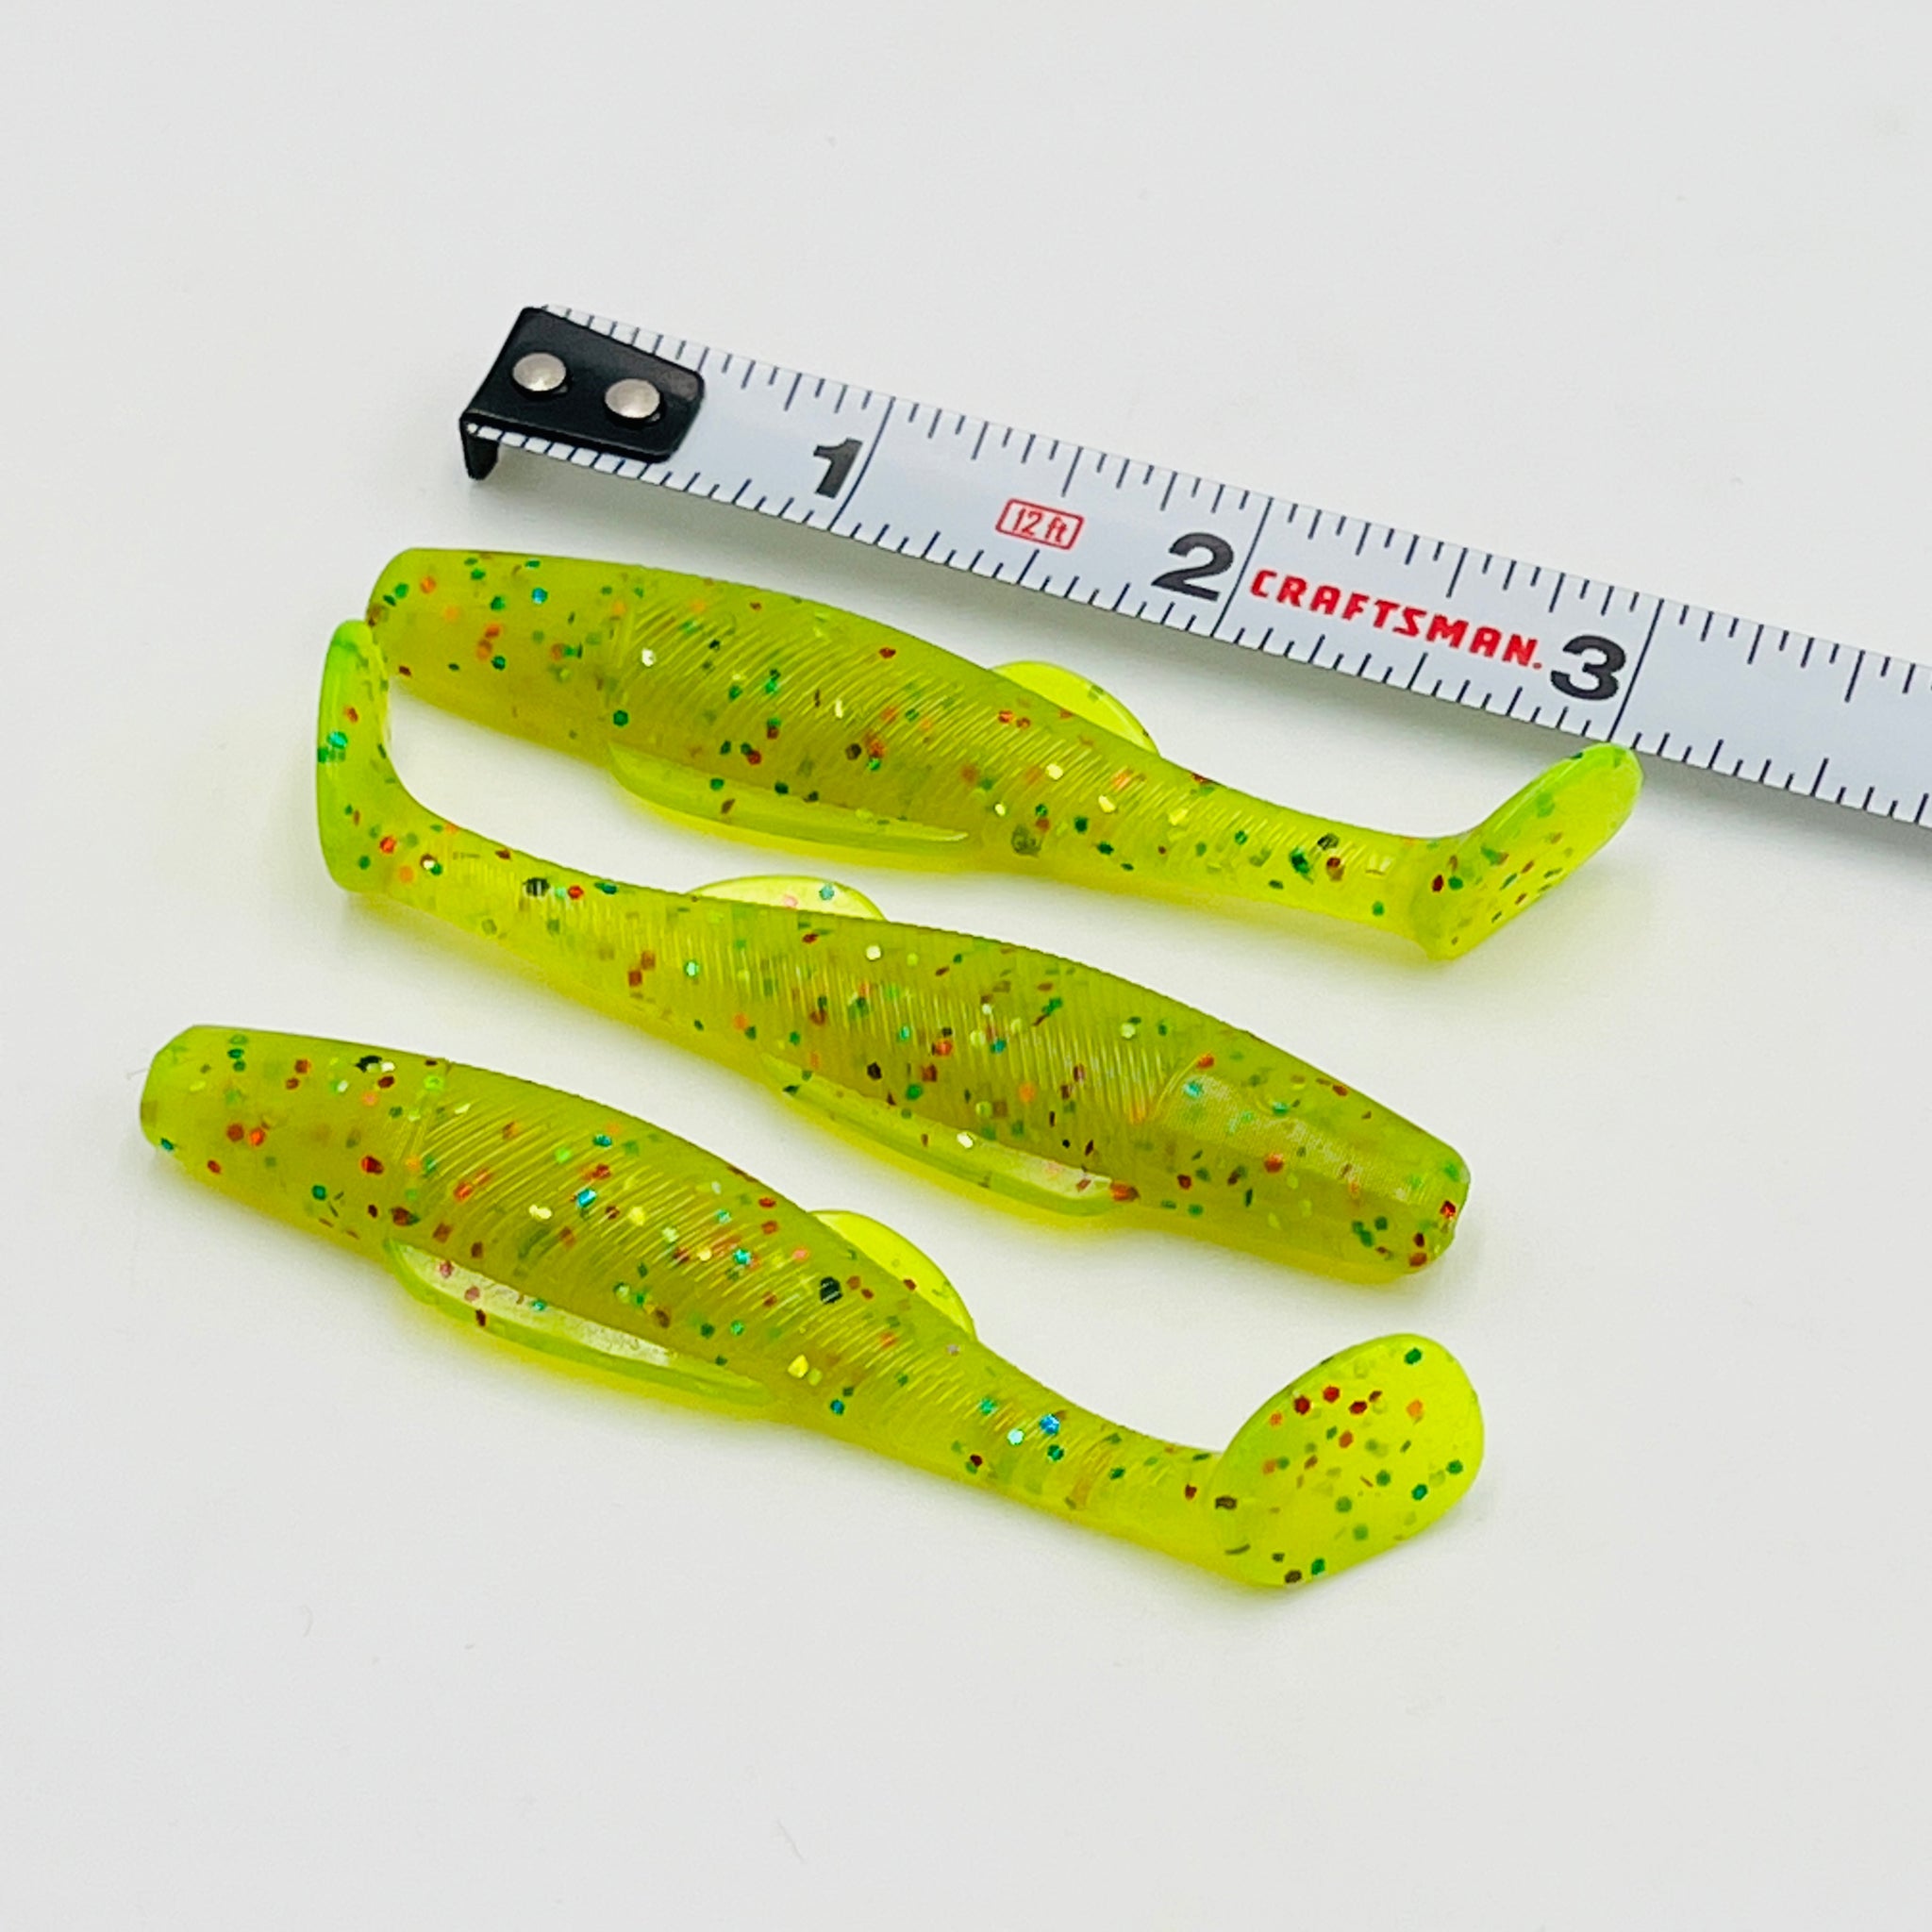 3 Inch Inshore Paddle Tail Swimbait Hand Injection Mold – Epic Bait Molds